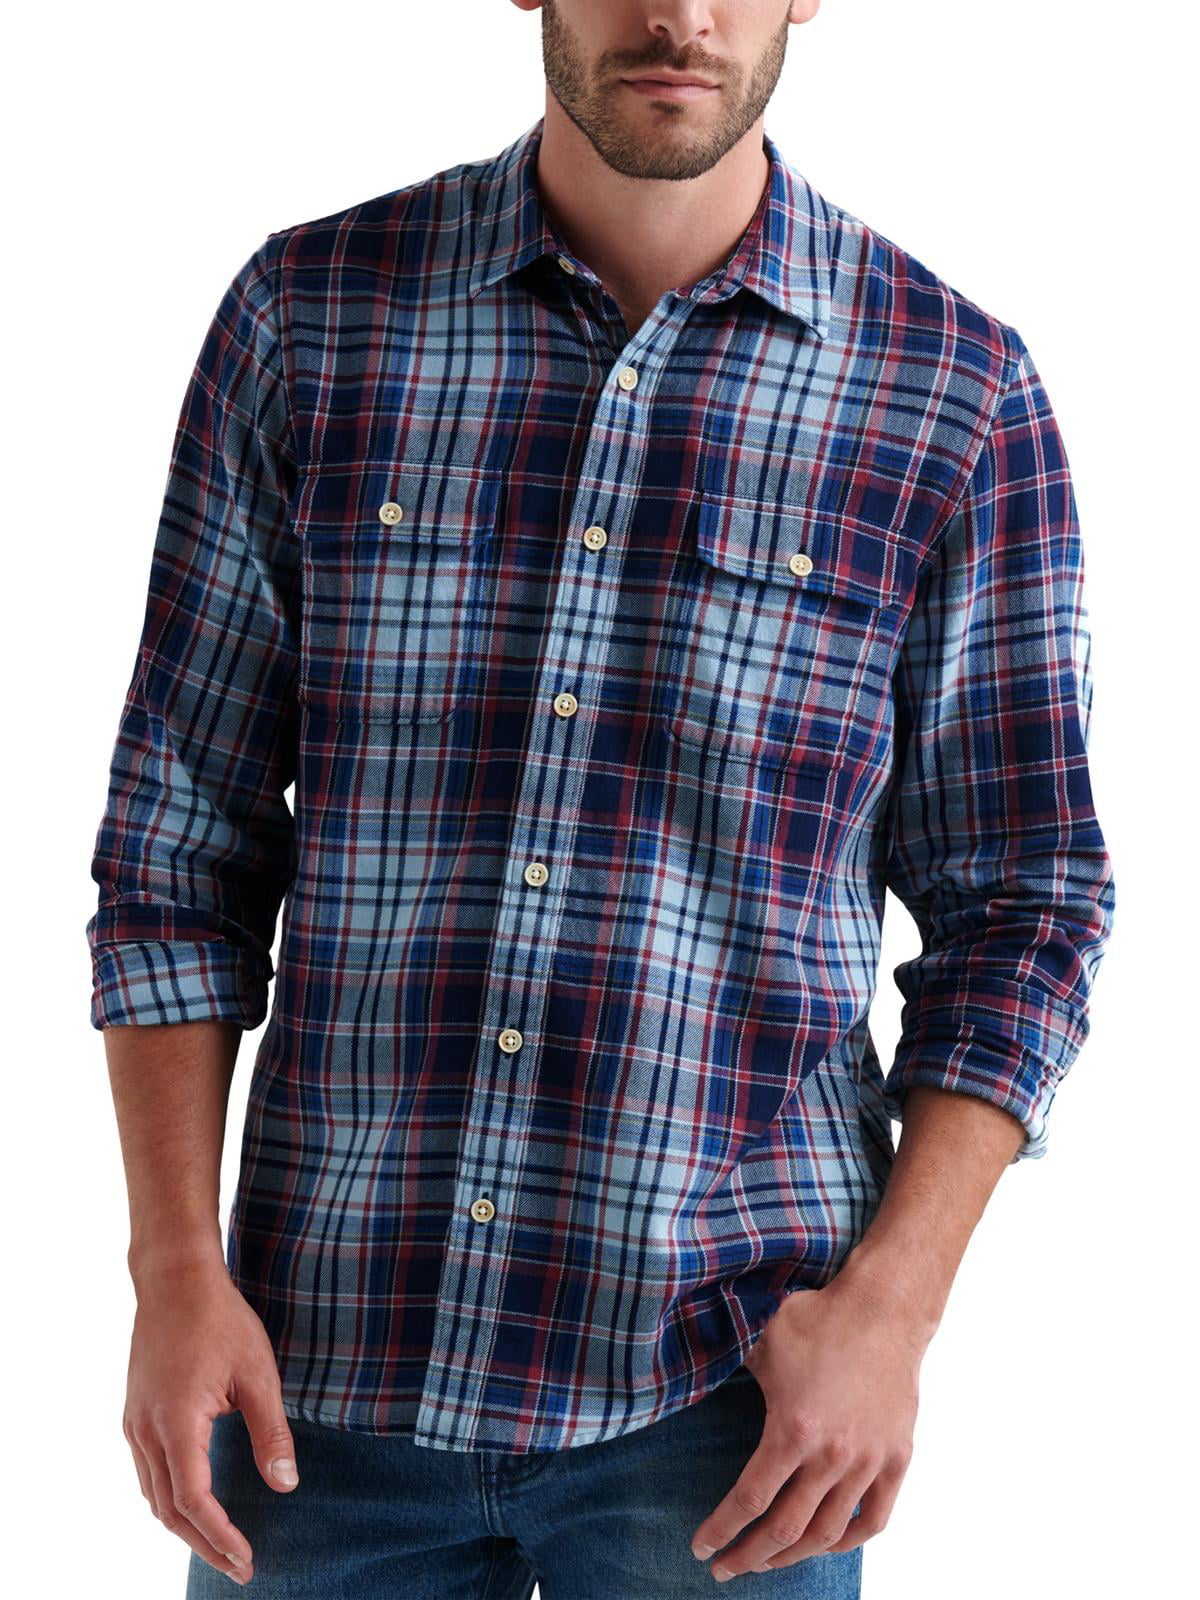 Lucky Brand Men's Two-Pocket Workwear Plaid Shirt (Blue Plaid, Small) 